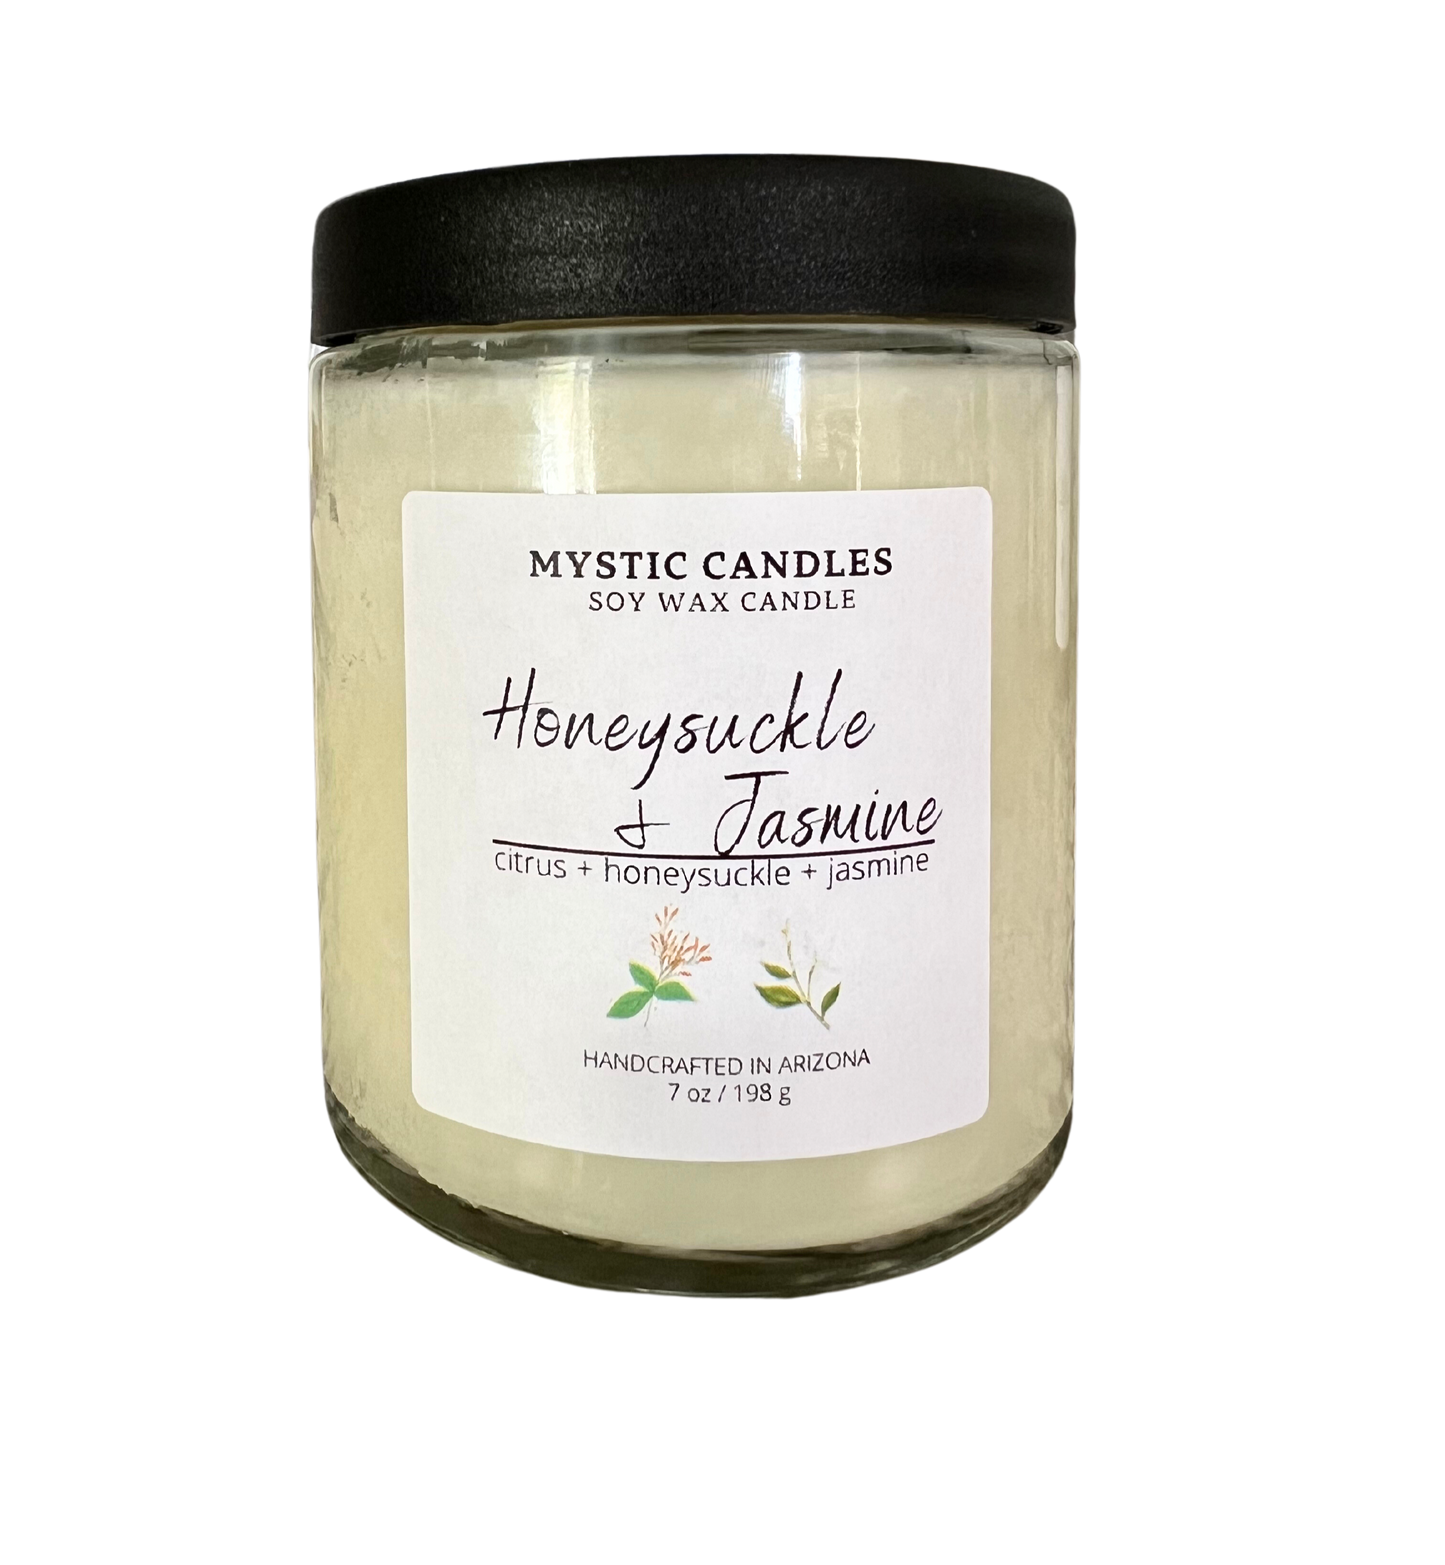 Honeysuckle & Jasmine Candle - Mystic Candles and Soaps LLC